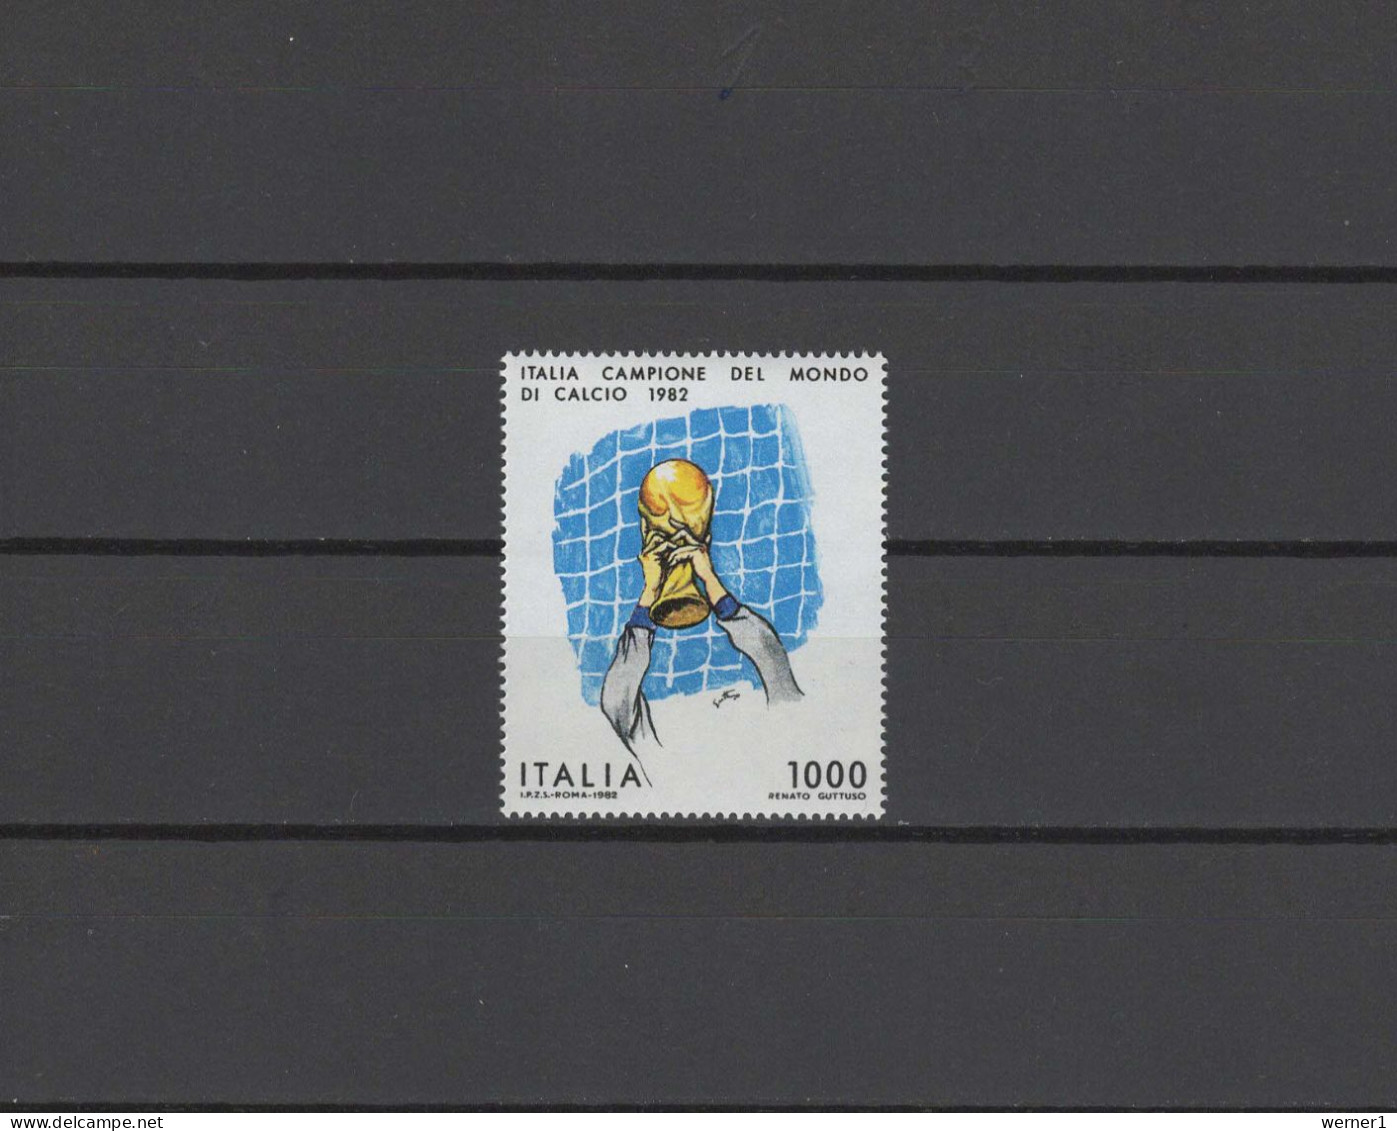 Italy 1982 Football Soccer World Cup Stamp MNH - 1982 – Spain